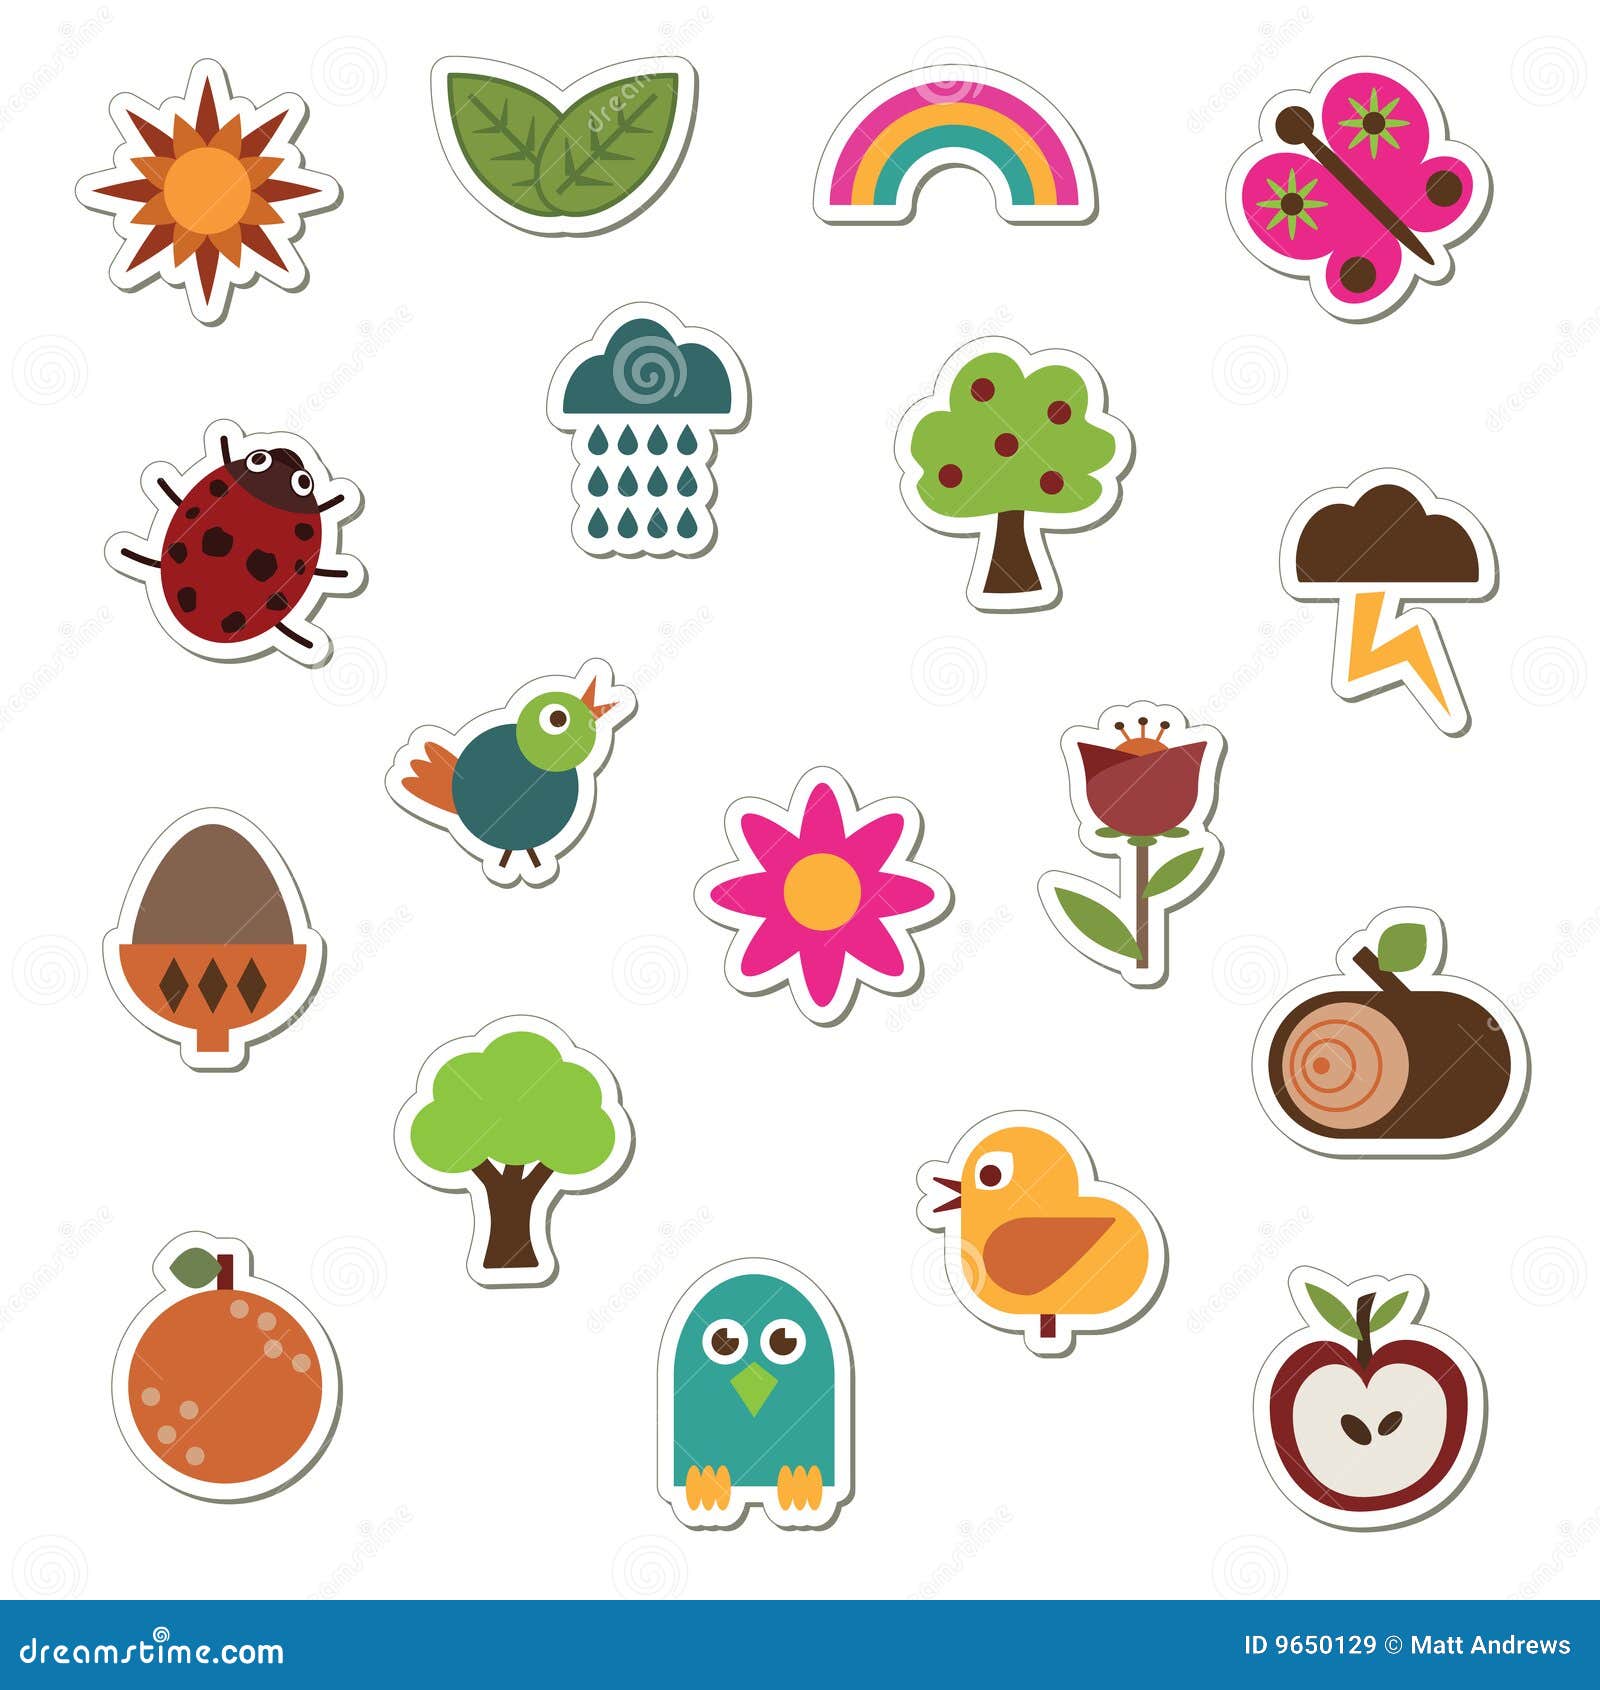 Nature stickers stock vector. Illustration of wood, chick - 9650129